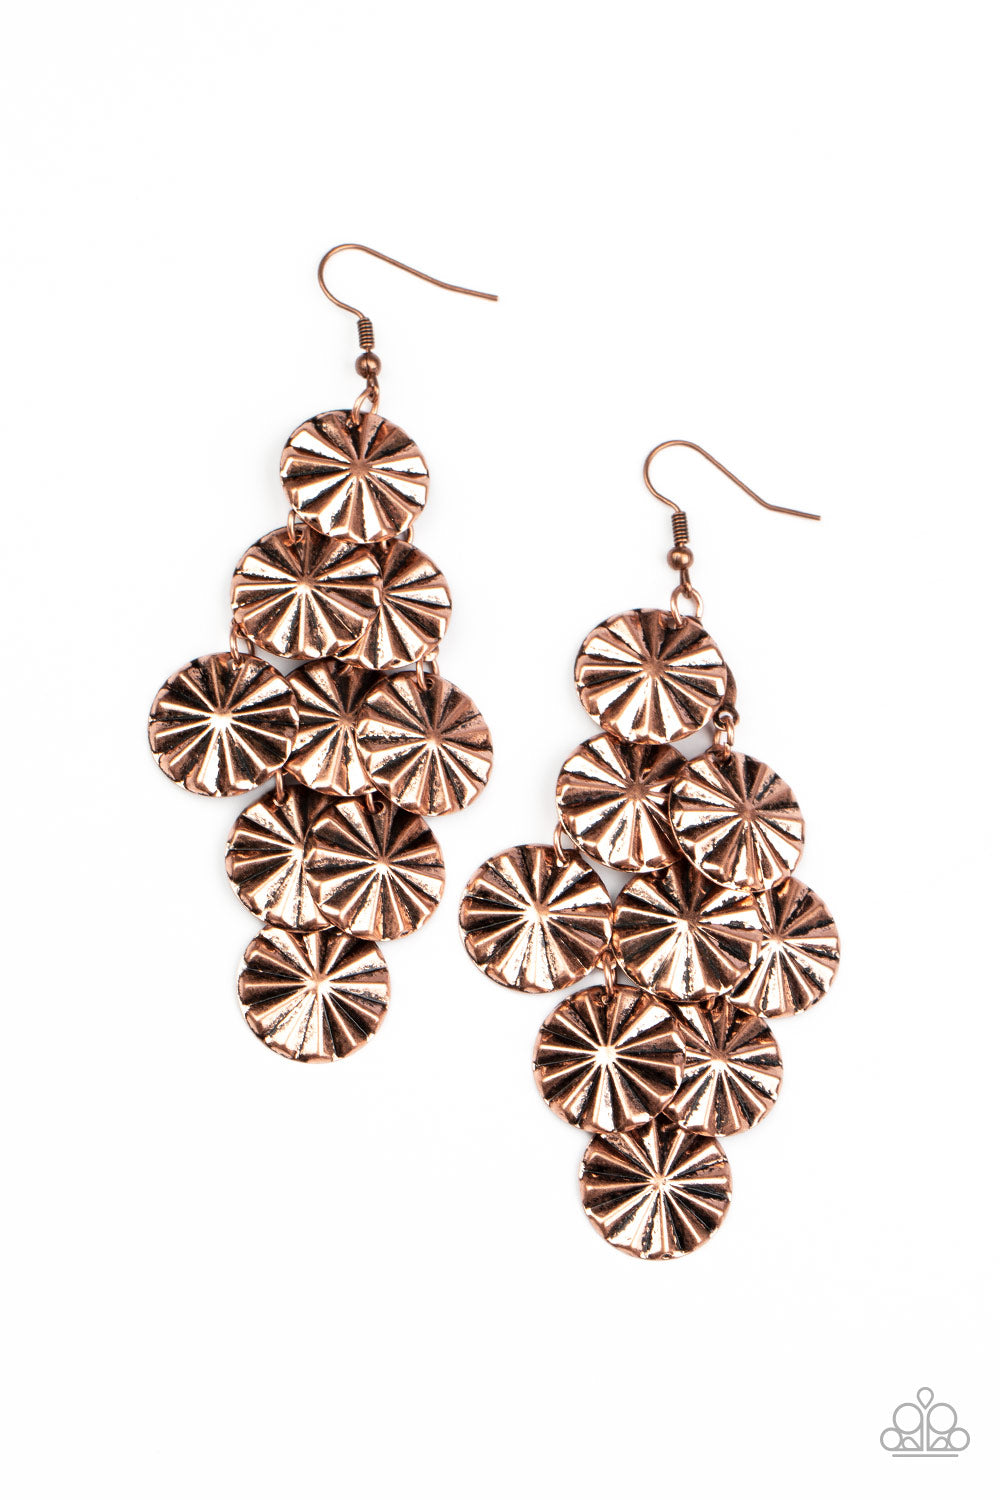 Paparazzi Accessories Star Spangled Shine - Copper Earrings - Lady T Accessories